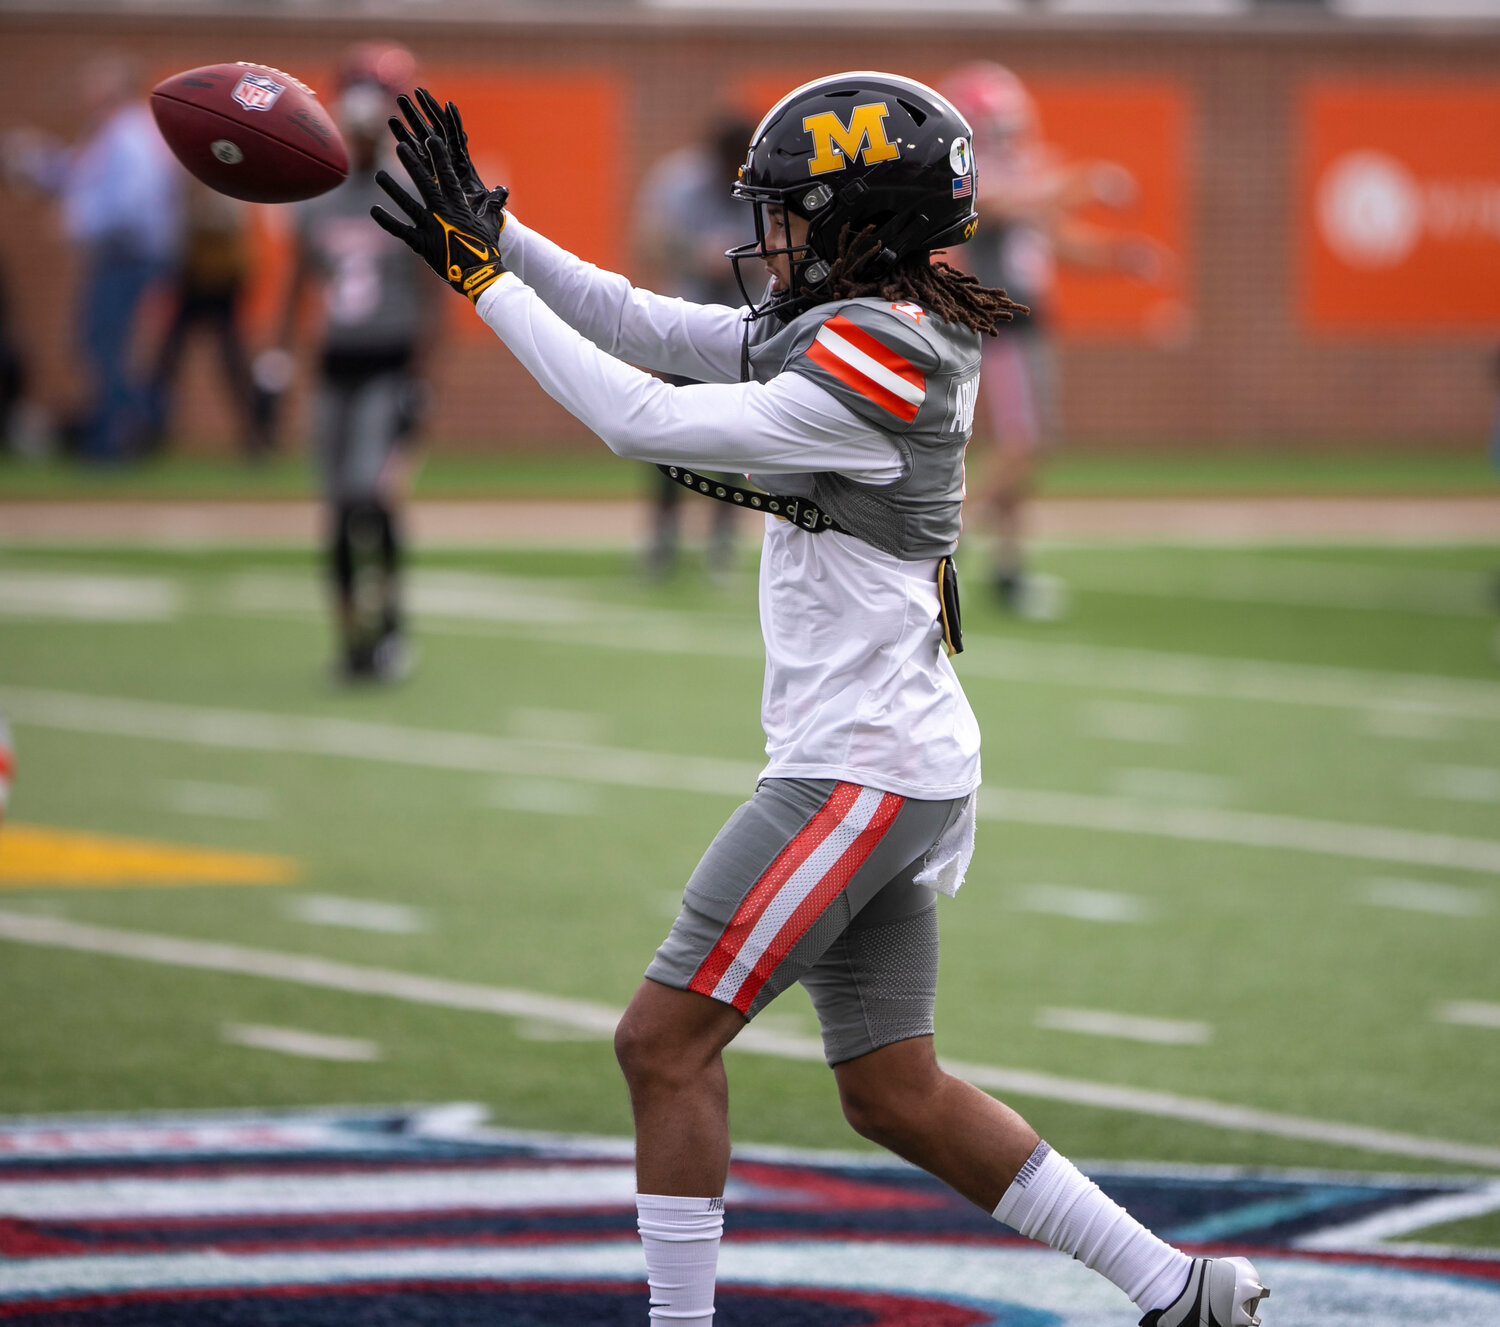 Kris Abrams-Draine catches a pass during pregame warmups on Saturday, Feb. 3, at Hancock Whitney Stadium in Mobile ahead of the 75th-annual Reese’s Senior Bowl. The former Missouri Tiger felt a sense of relief now that the Senior Bowl festivities have wrapped up and he can get back to training before the 2024 NFL Draft this spring.